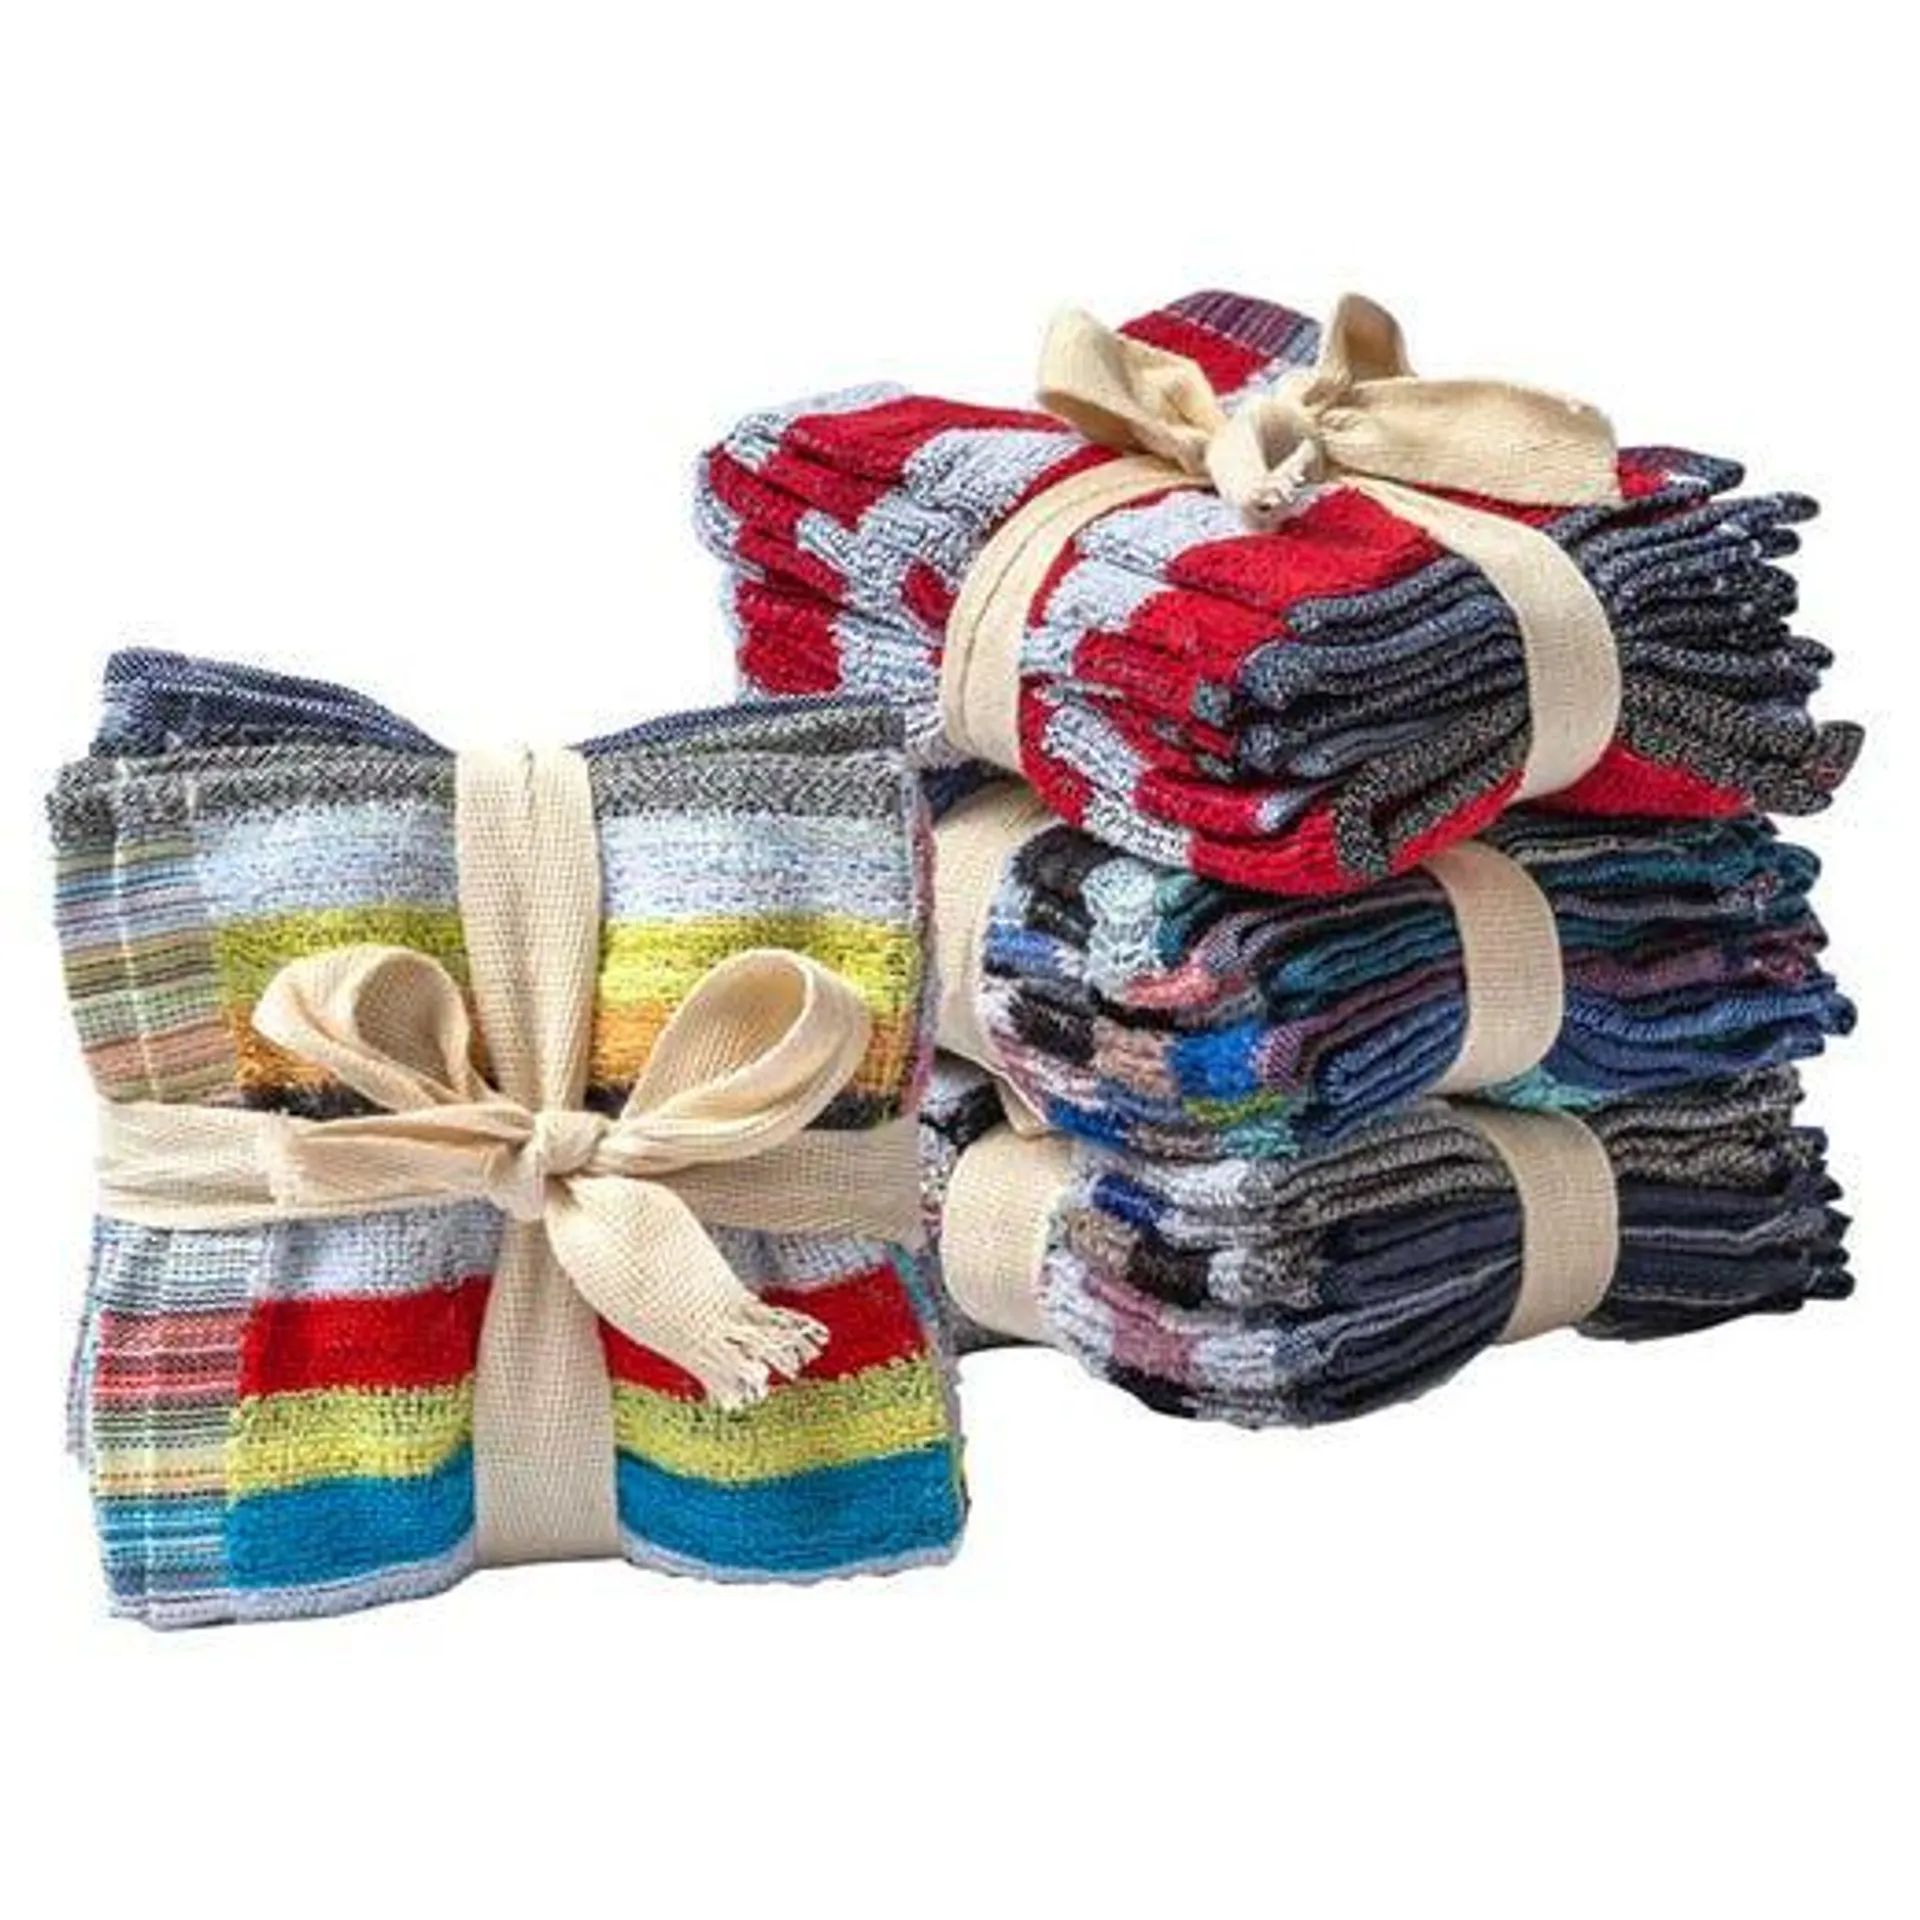 100% Cotton Washcloth (Pack of 5)